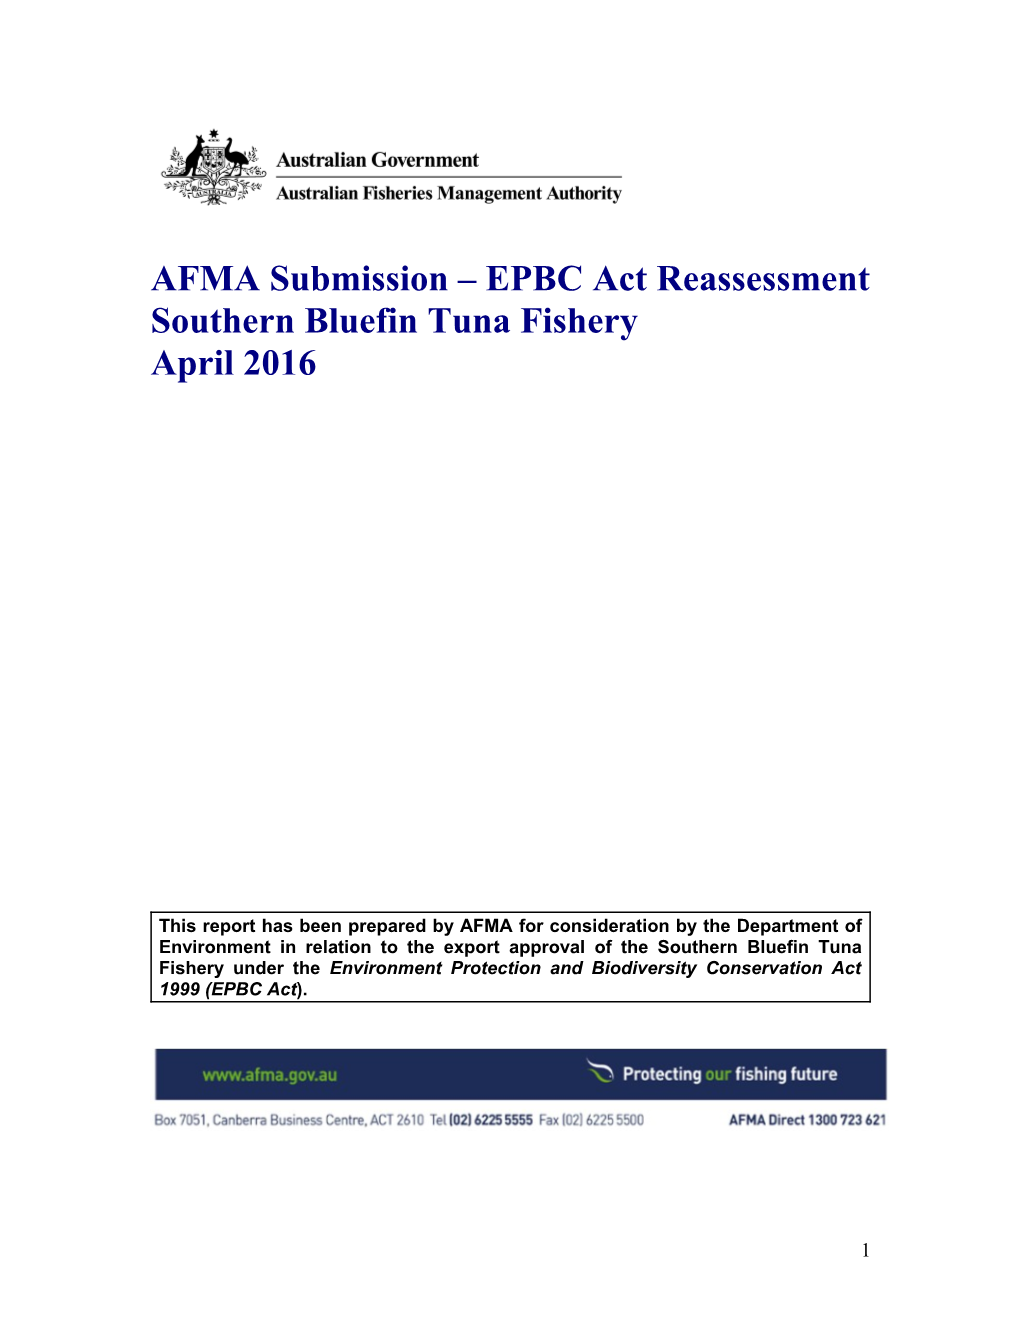 AFMA Submission EPBC Act Reassessment: Southern Bluefin Tuna Fishery April 2016